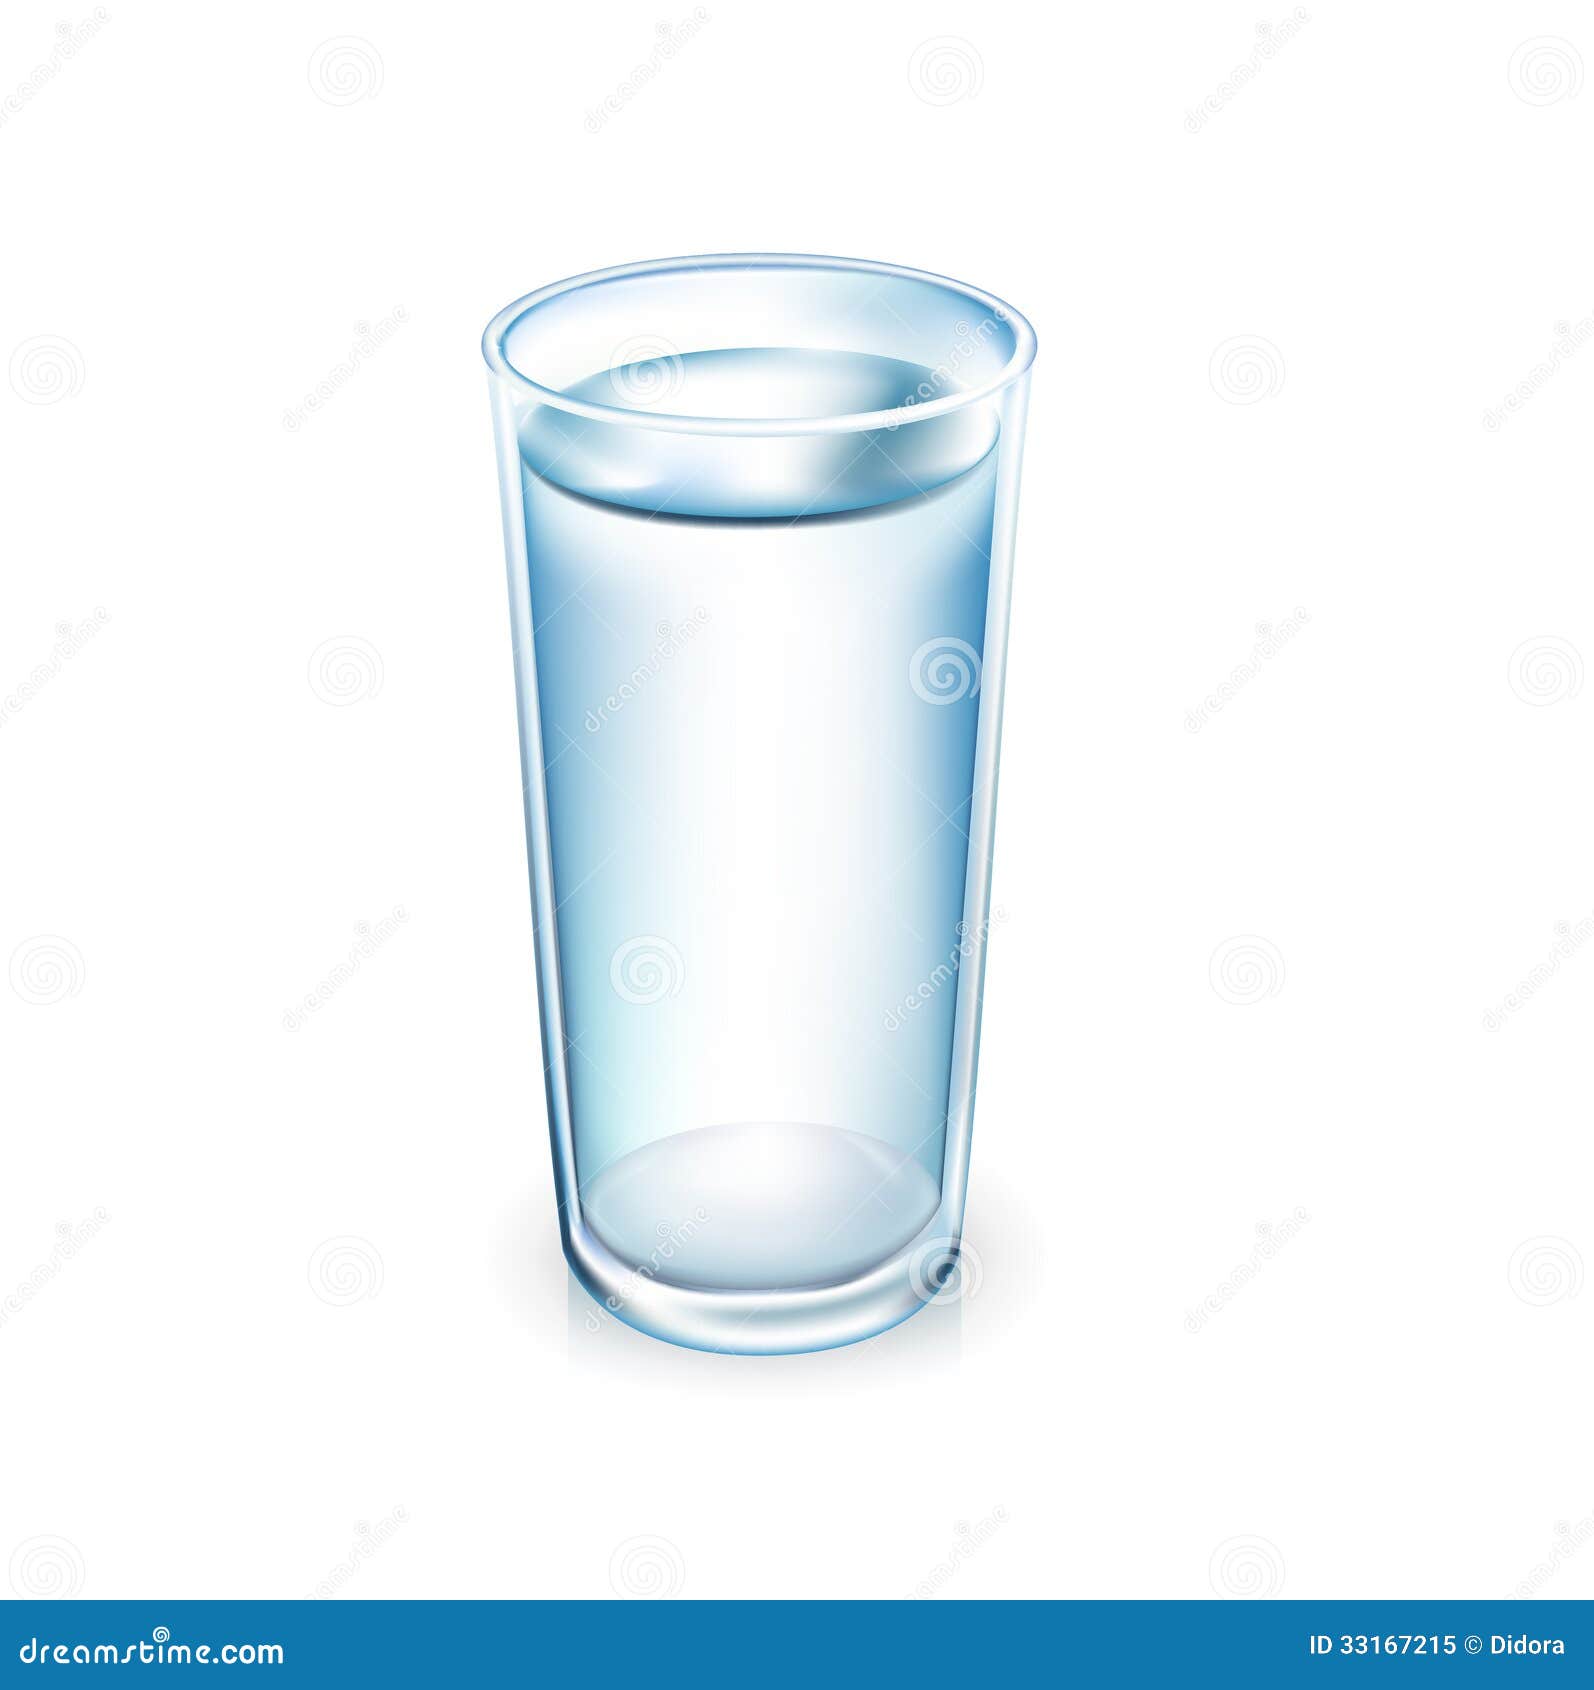 clipart of a glass of water - photo #43